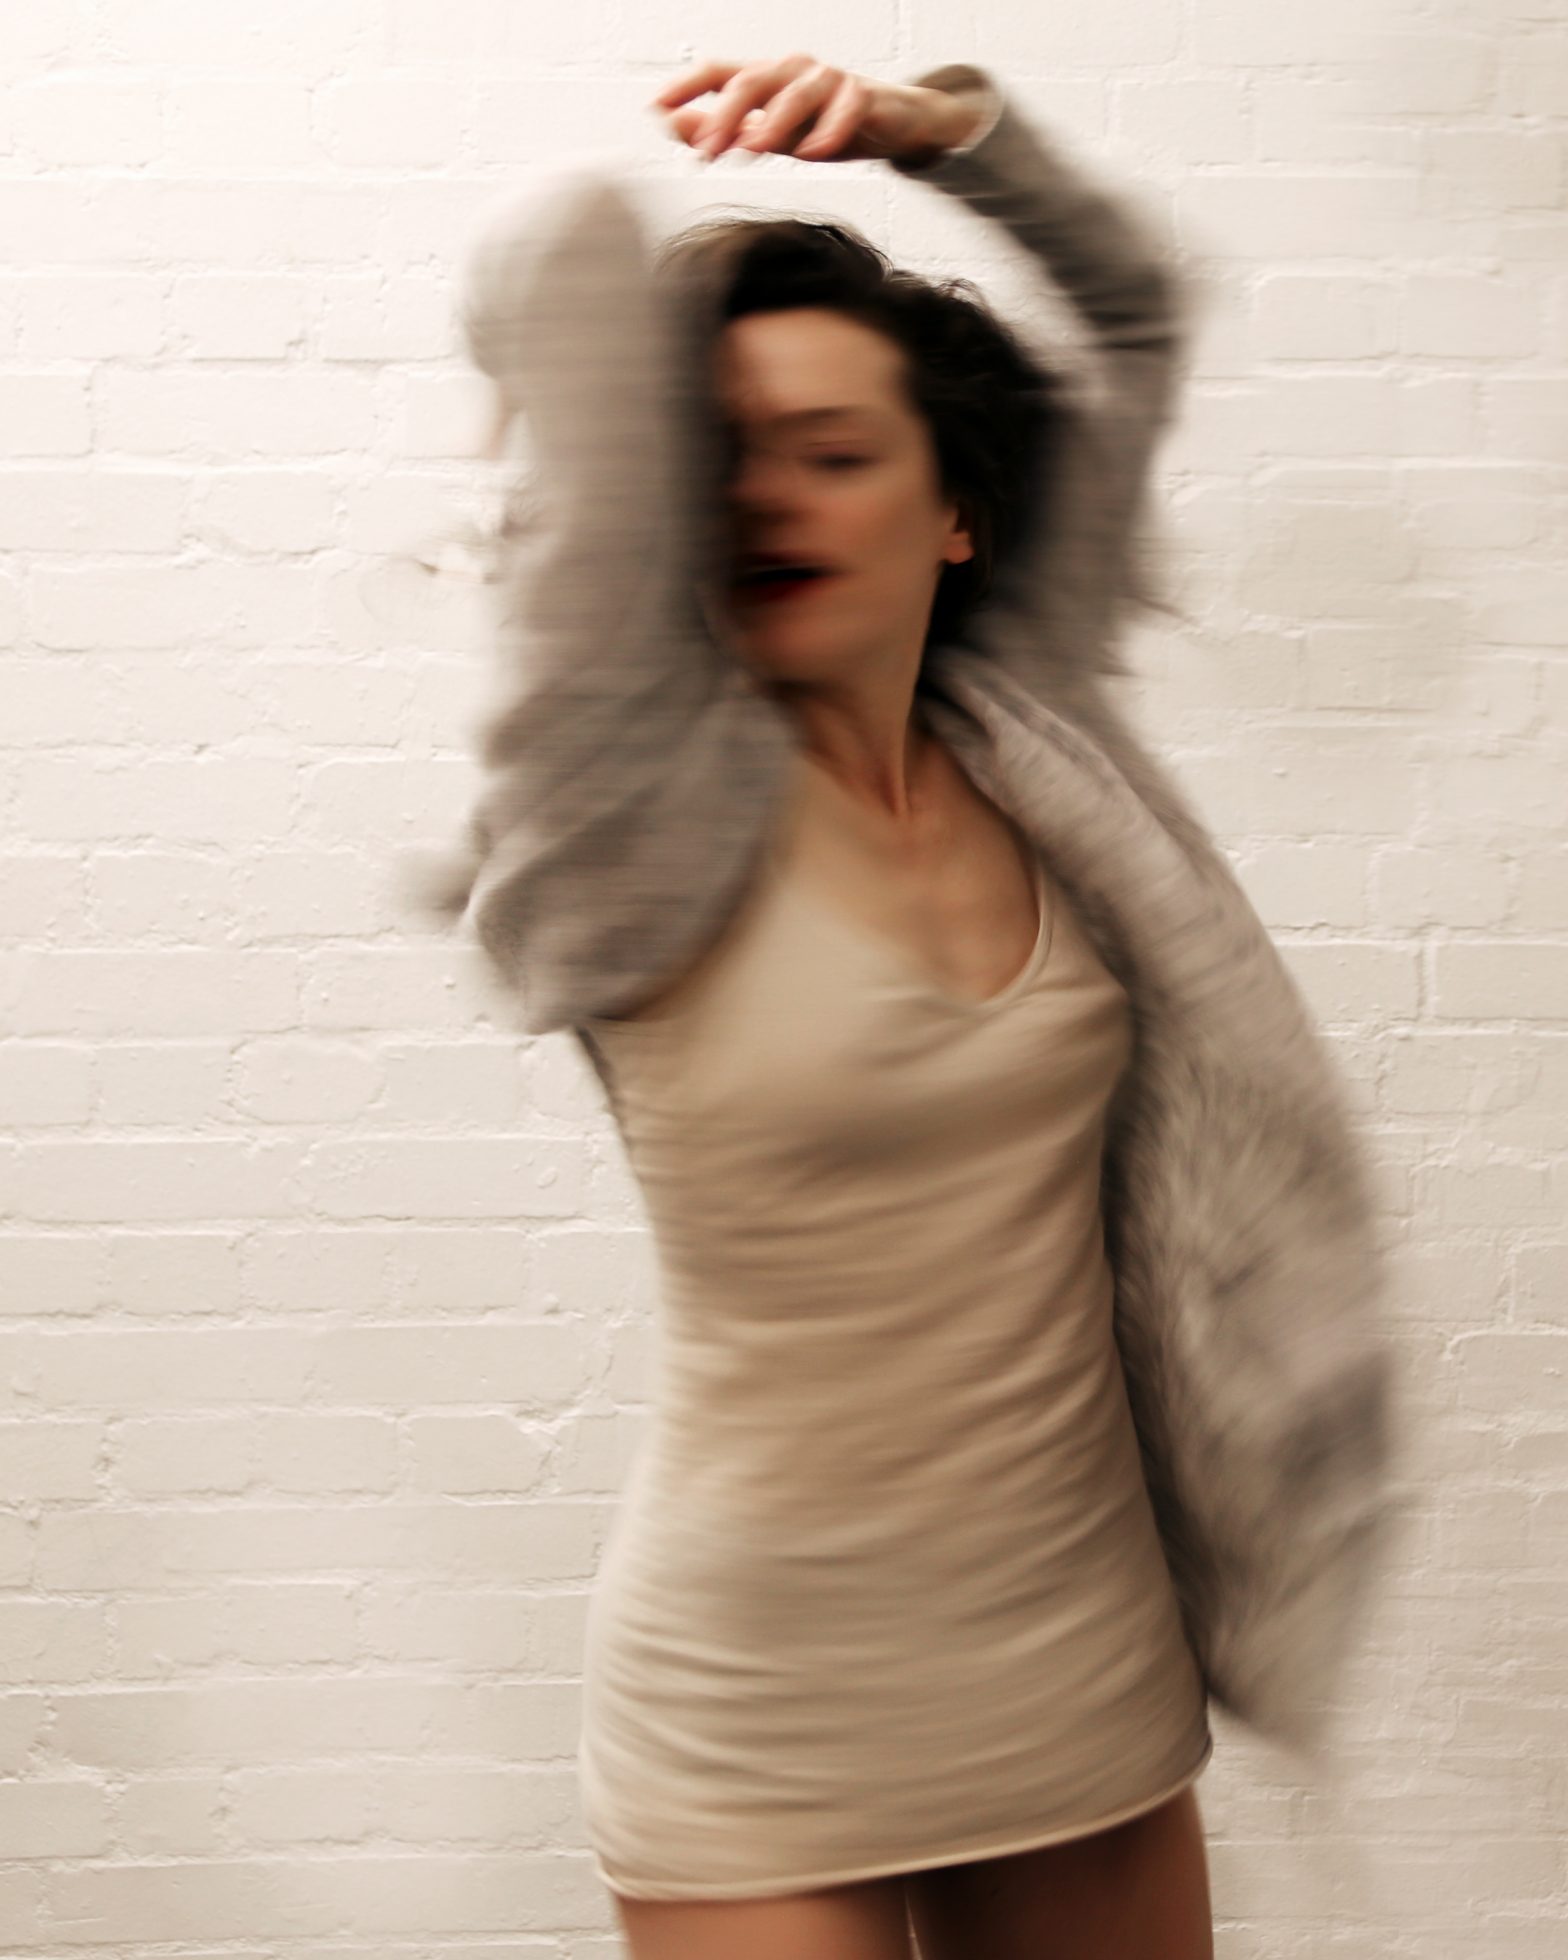 Photo of Laura Careless. She is wearing a cream dress and jacket, her arms are above her head and her body is slightly twisted.